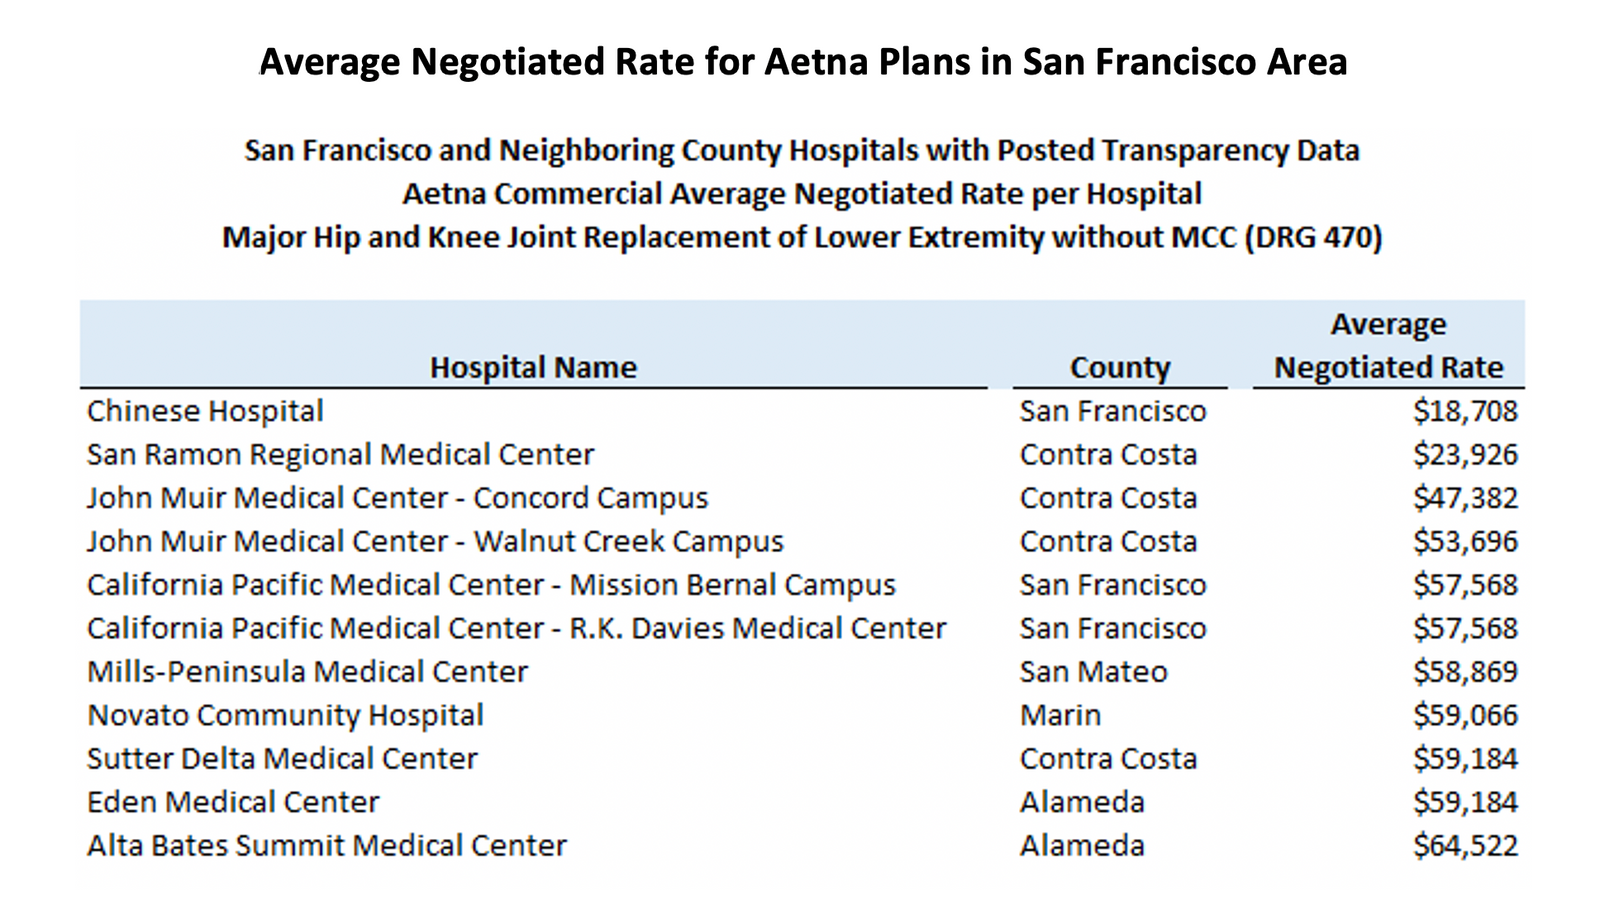 A graph showing negotiated rates of Aetna plans